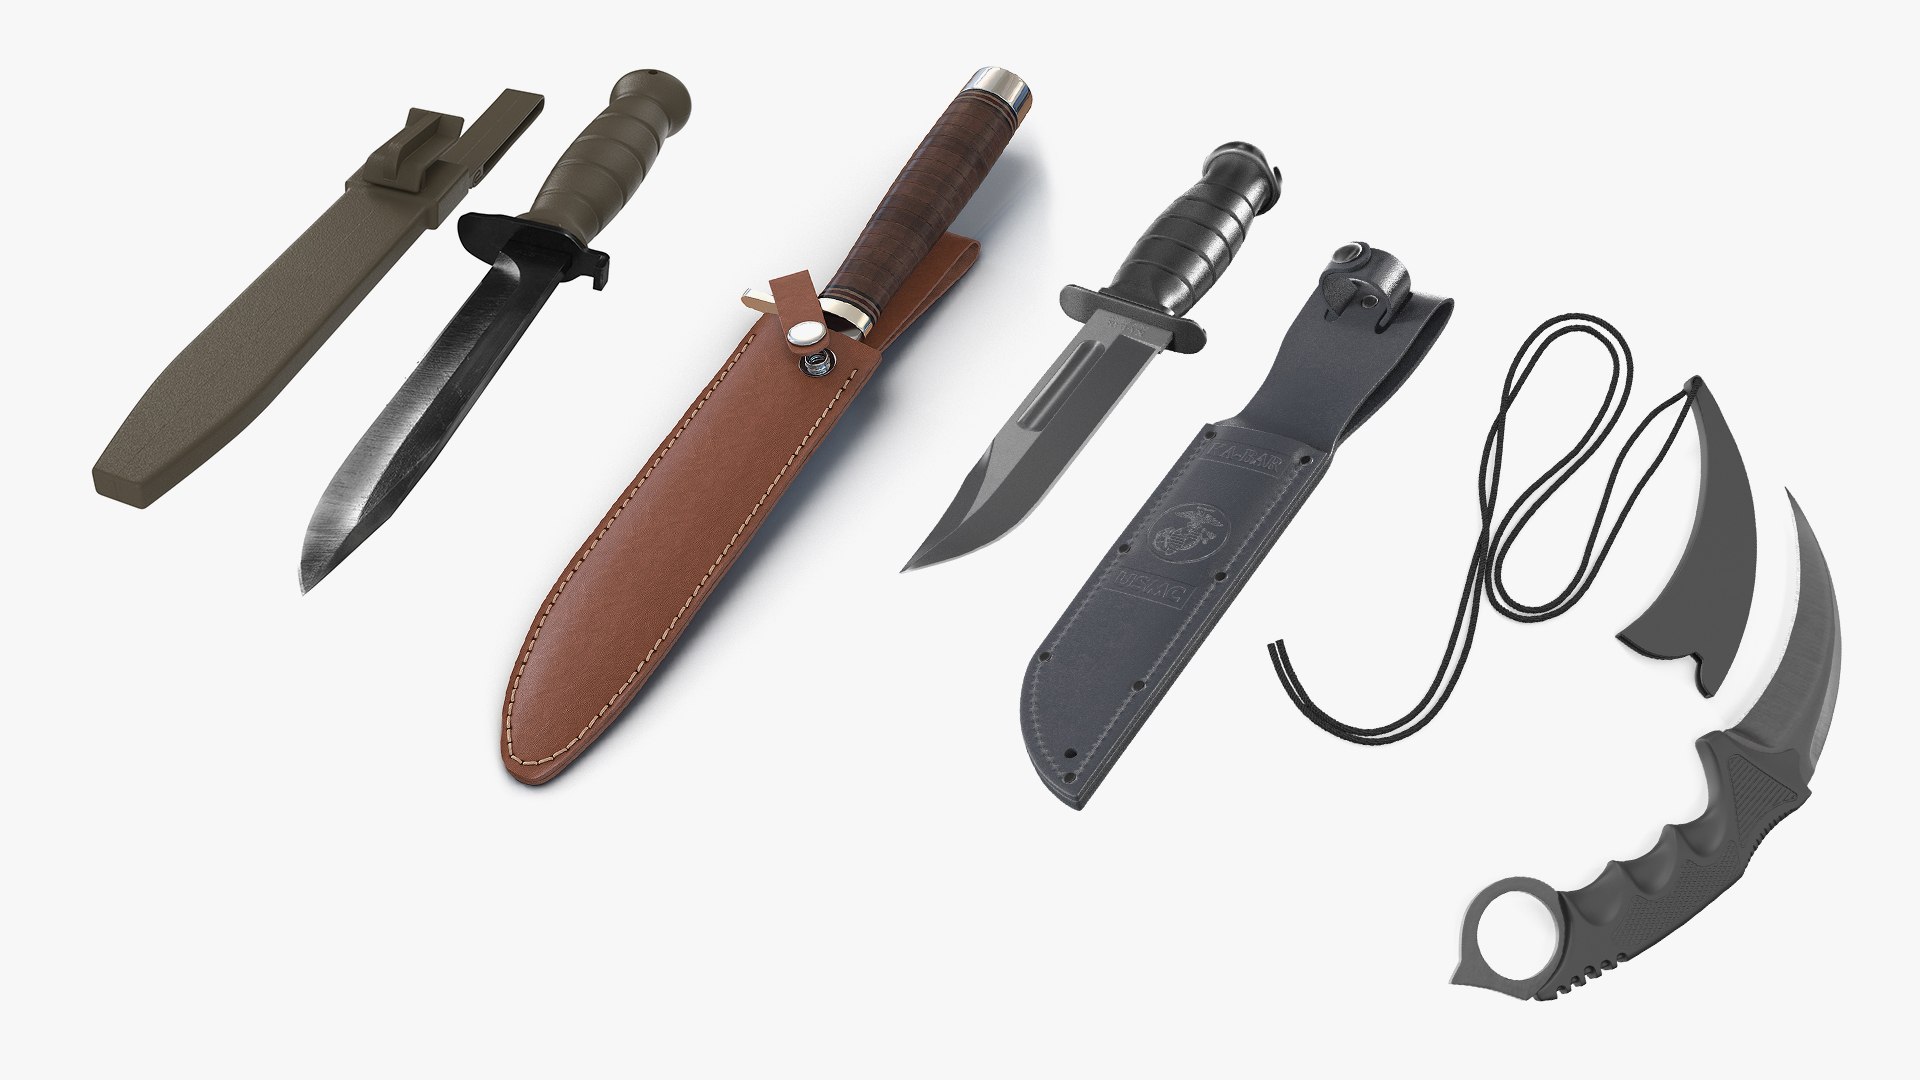 3,492 Leather Knife Sheath Images, Stock Photos, 3D objects, & Vectors